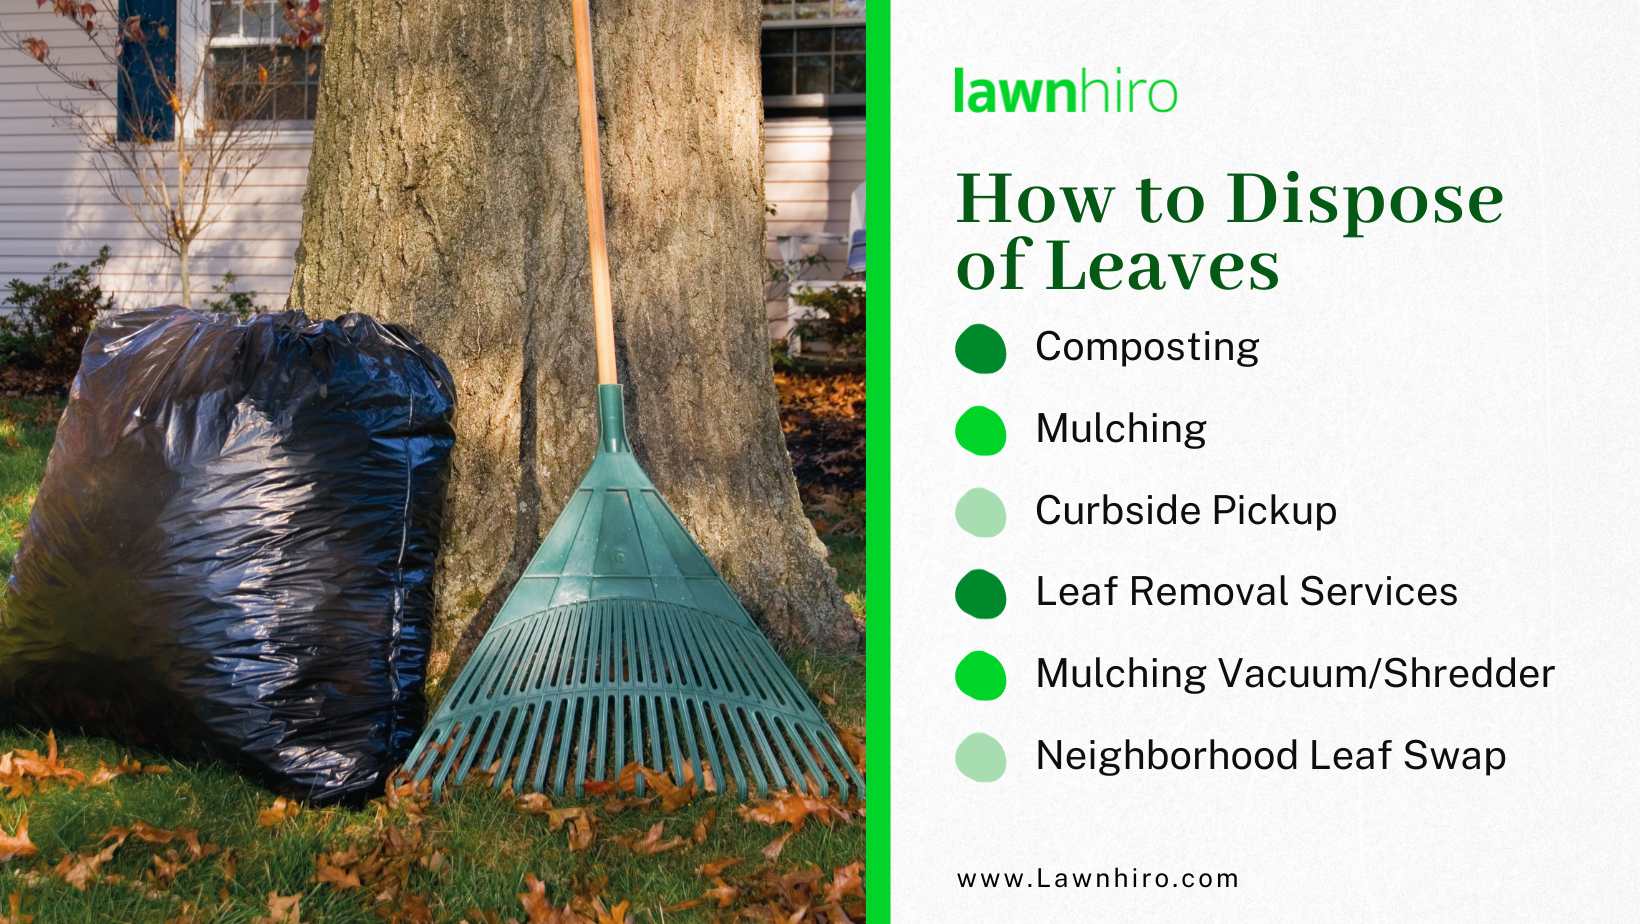 You have multiple ways to dispose of leaves